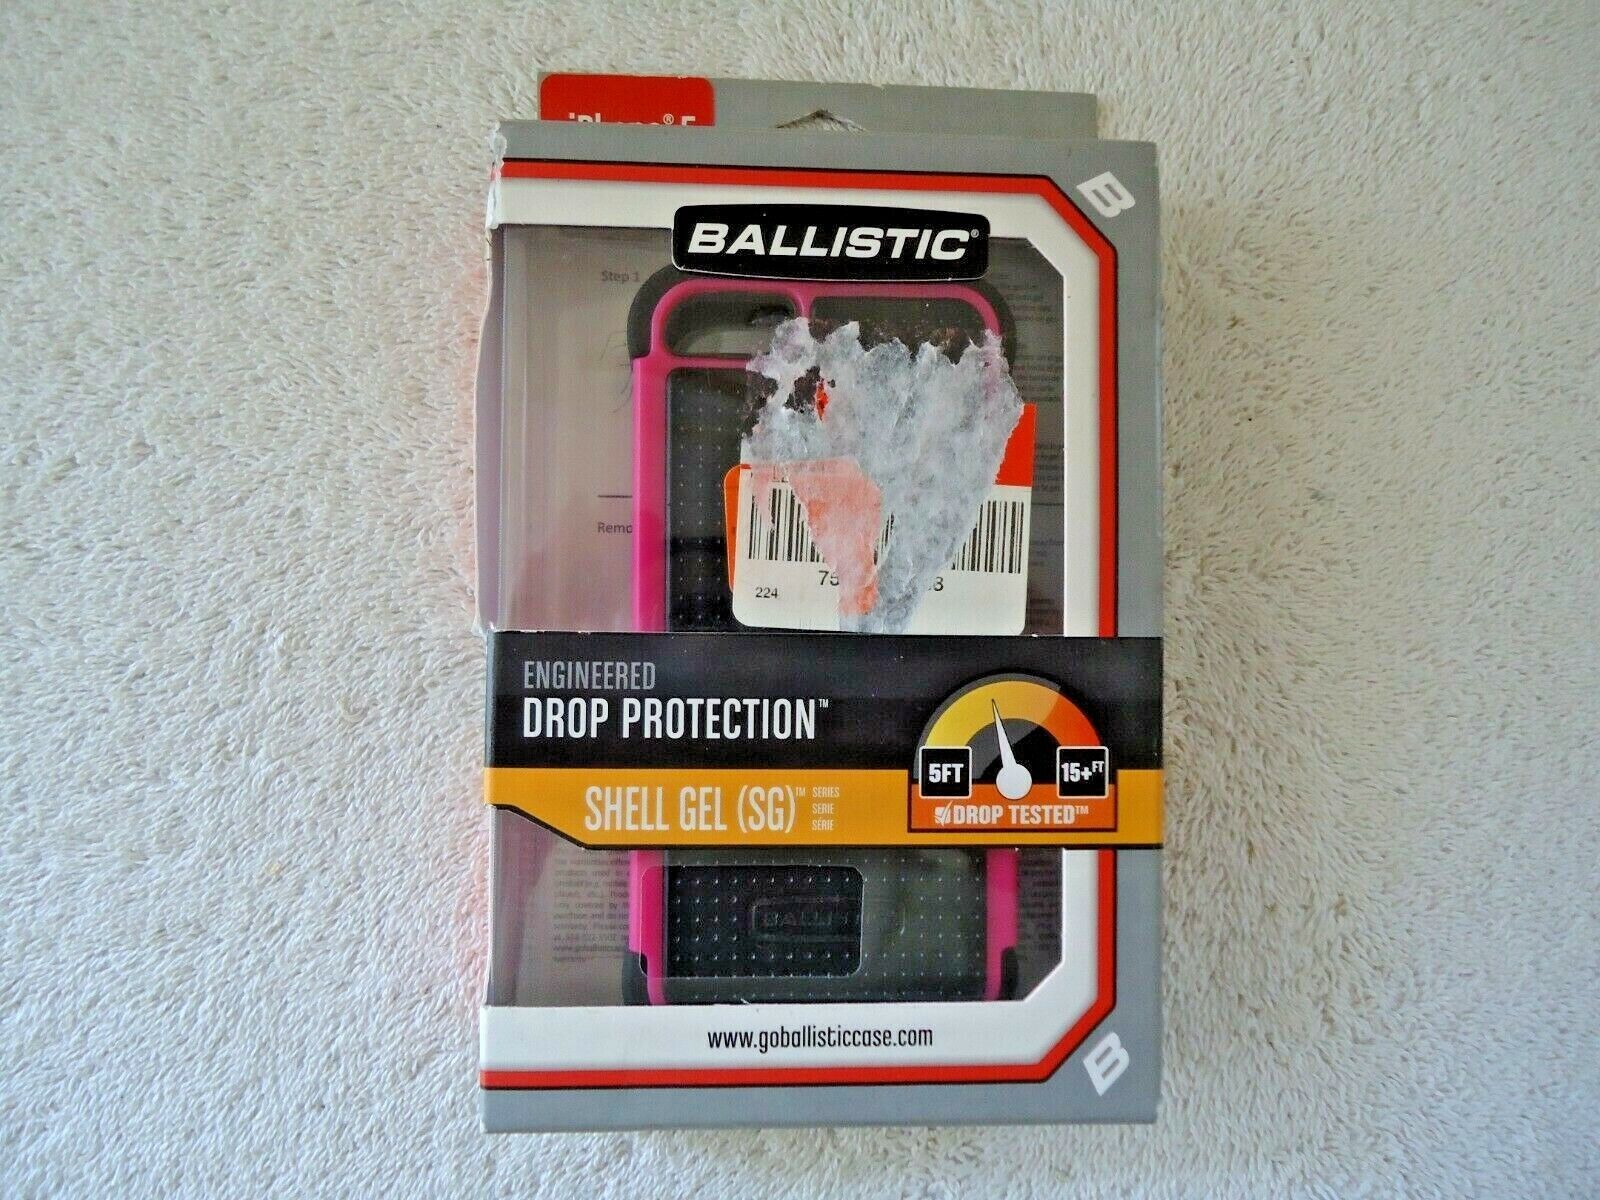 Primary image for " NIB " Ballistic Iphone 5 Shell Gel Phone Case " GREAT ITEM "